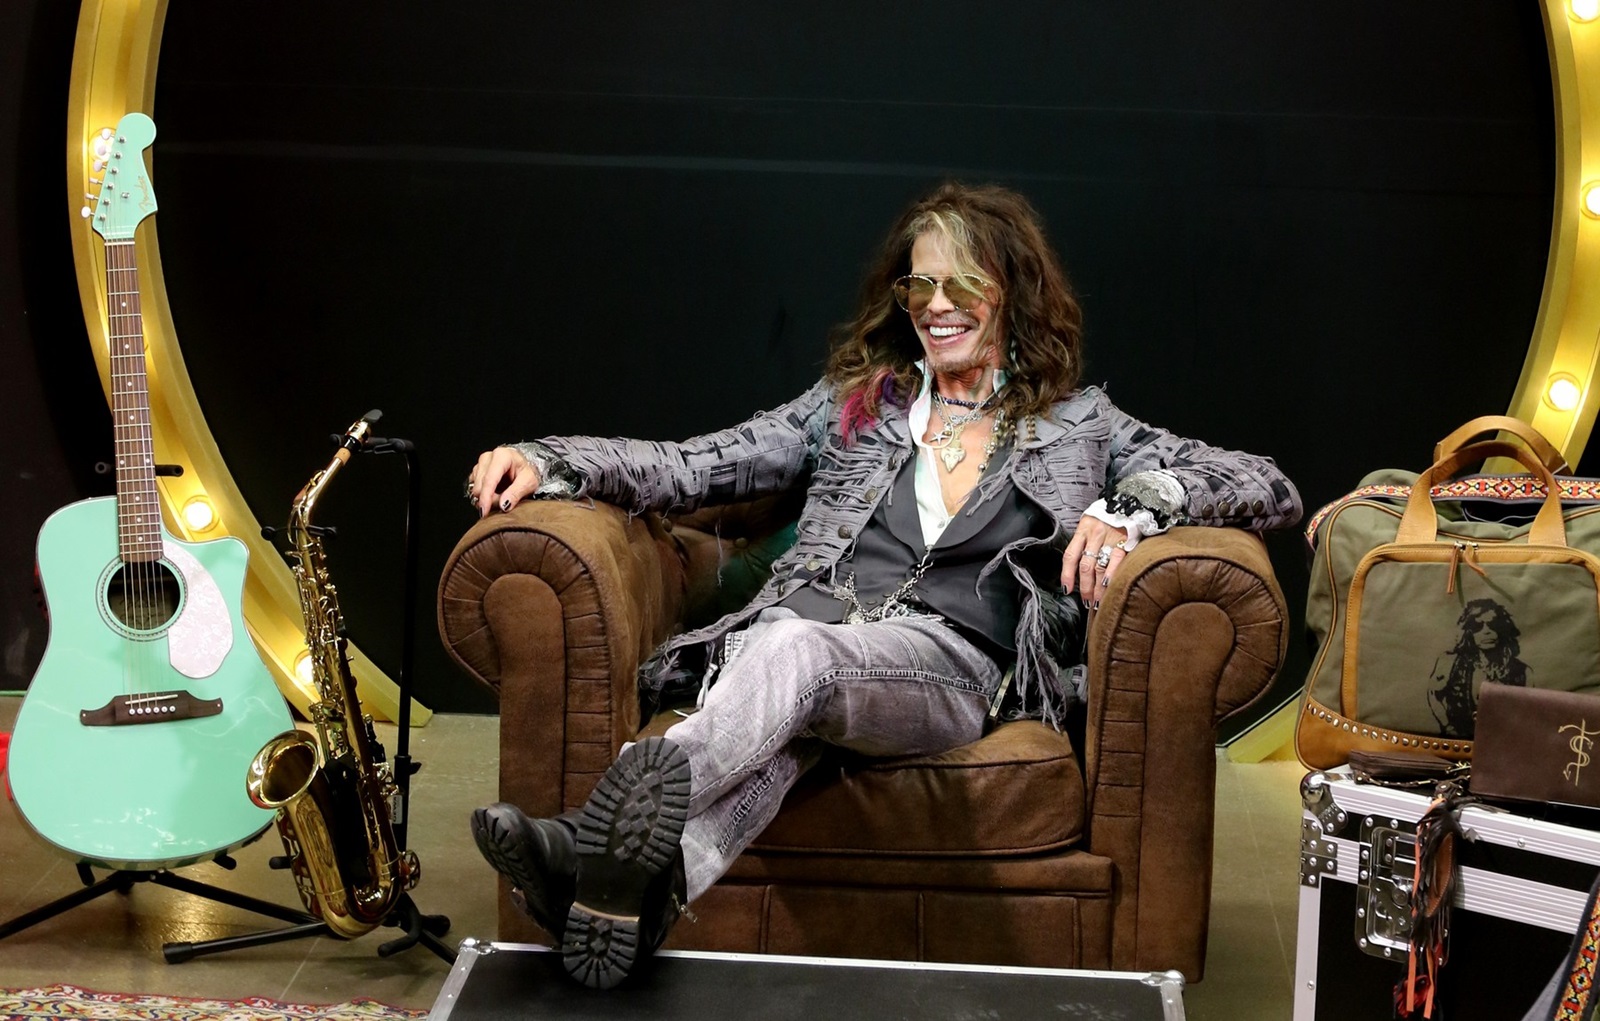 August 1, 2018 (Marbella, Malaga) Steven Tyler (Aerosmith ) creates his own brand with Starlite and presents the new collections designed by the iconic rock legend. The brand 'Steven Tyler Time Traveler' is composed of three different collections of bags and travel items.